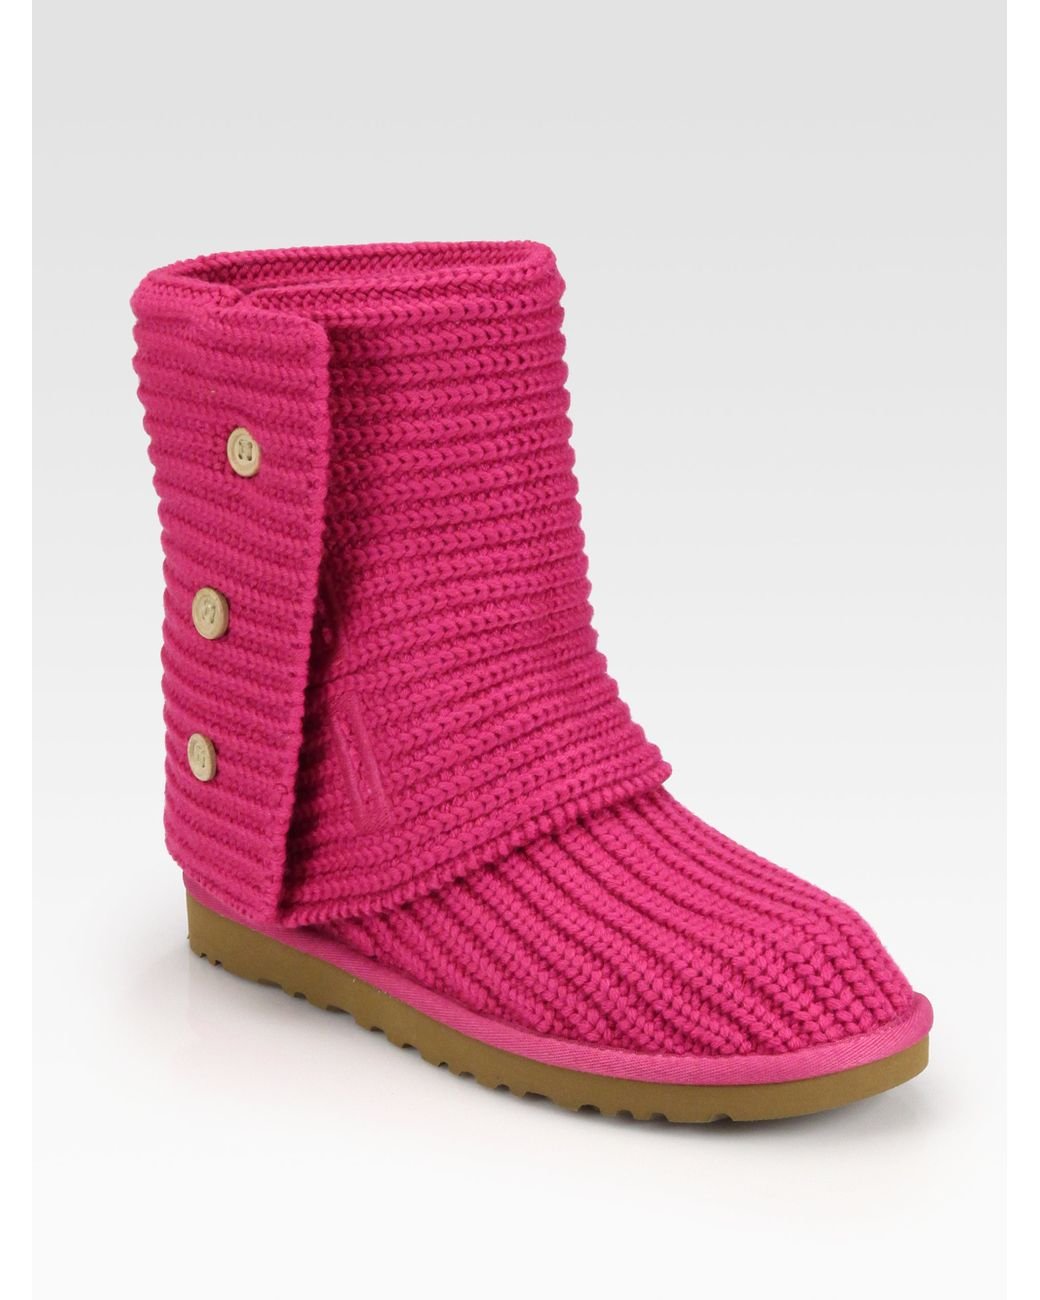 UGG Classic Cardy Boots in Pink | Lyst